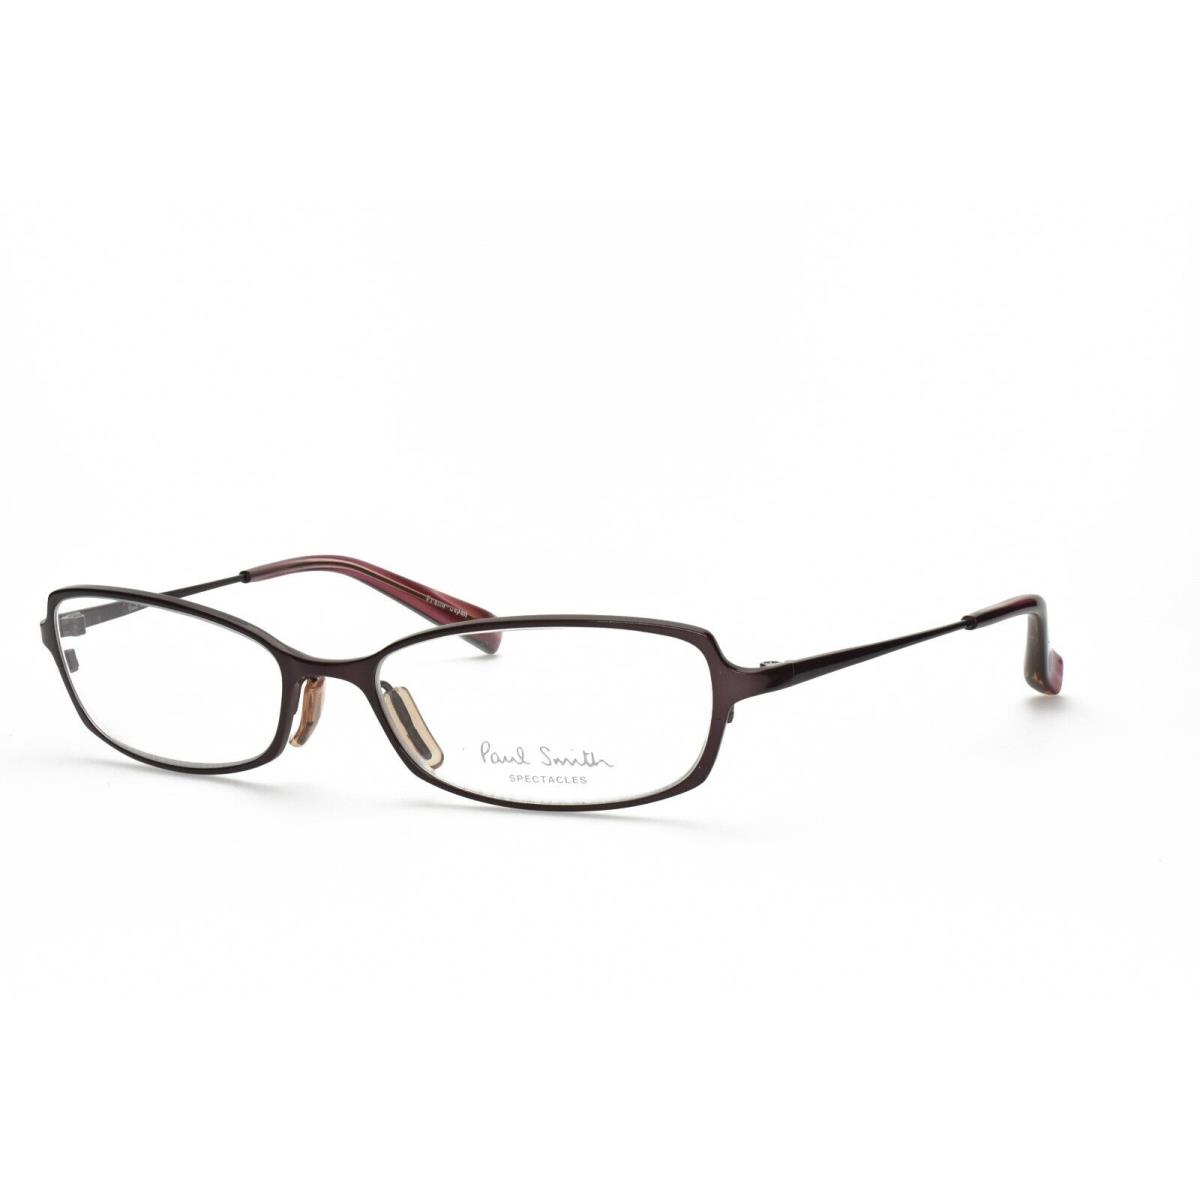 Paul Smith PS 188 PL Eyeglasses Frames Only 51-16-130